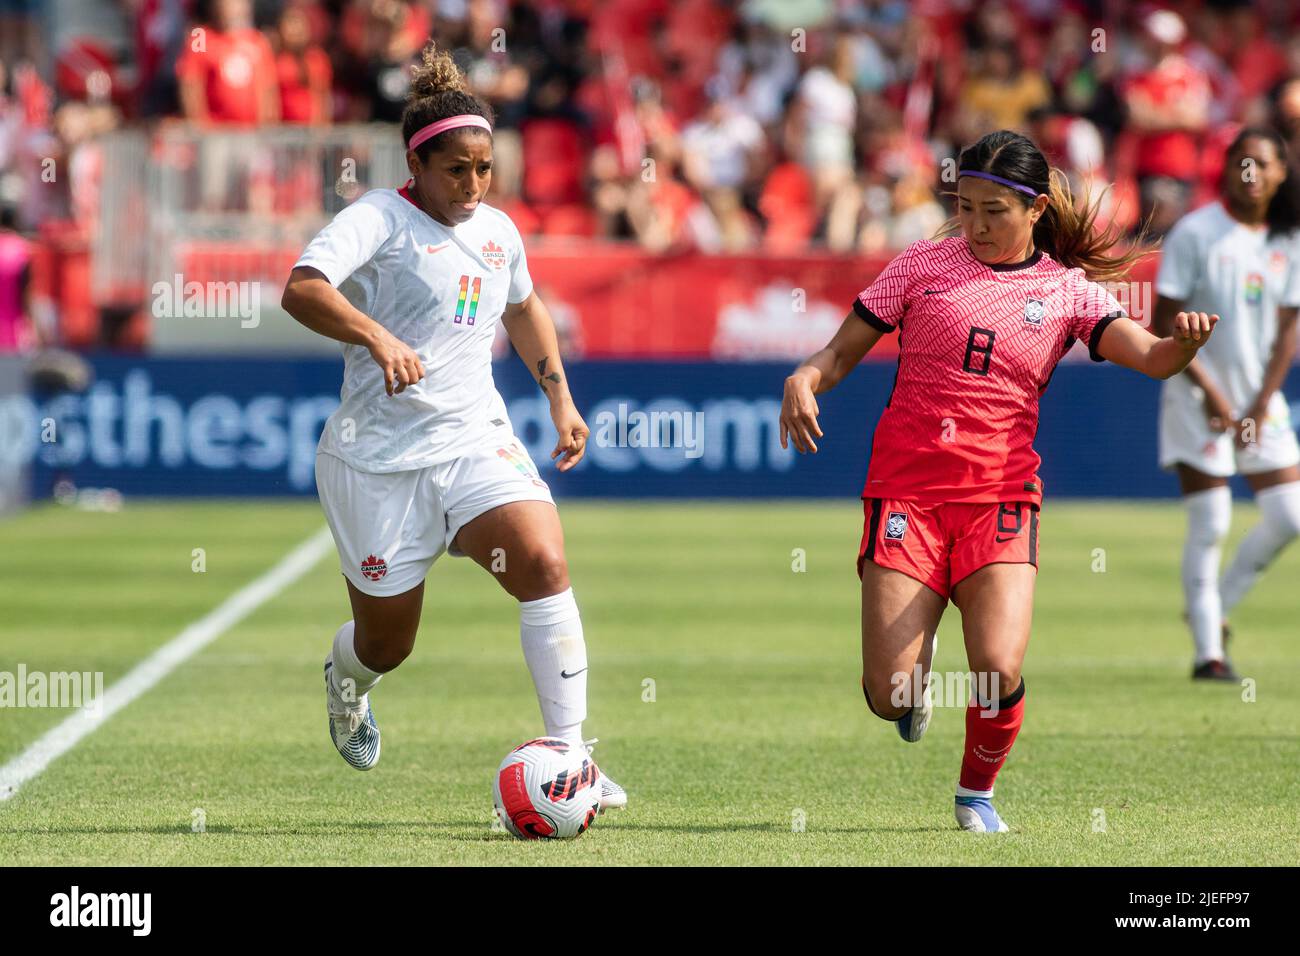 Toronto, Canada, June 26, 2022: Desiree Scott (left) of Team Canada and Cho So-hyun (right) of Team Korea Republic compete for the ball during the International Friendly Match at BMO Field in Toronto, Canada. Canada and Korea draw 0-0. Credit: Phamai Techaphan/Alamy Live News Stock Photo